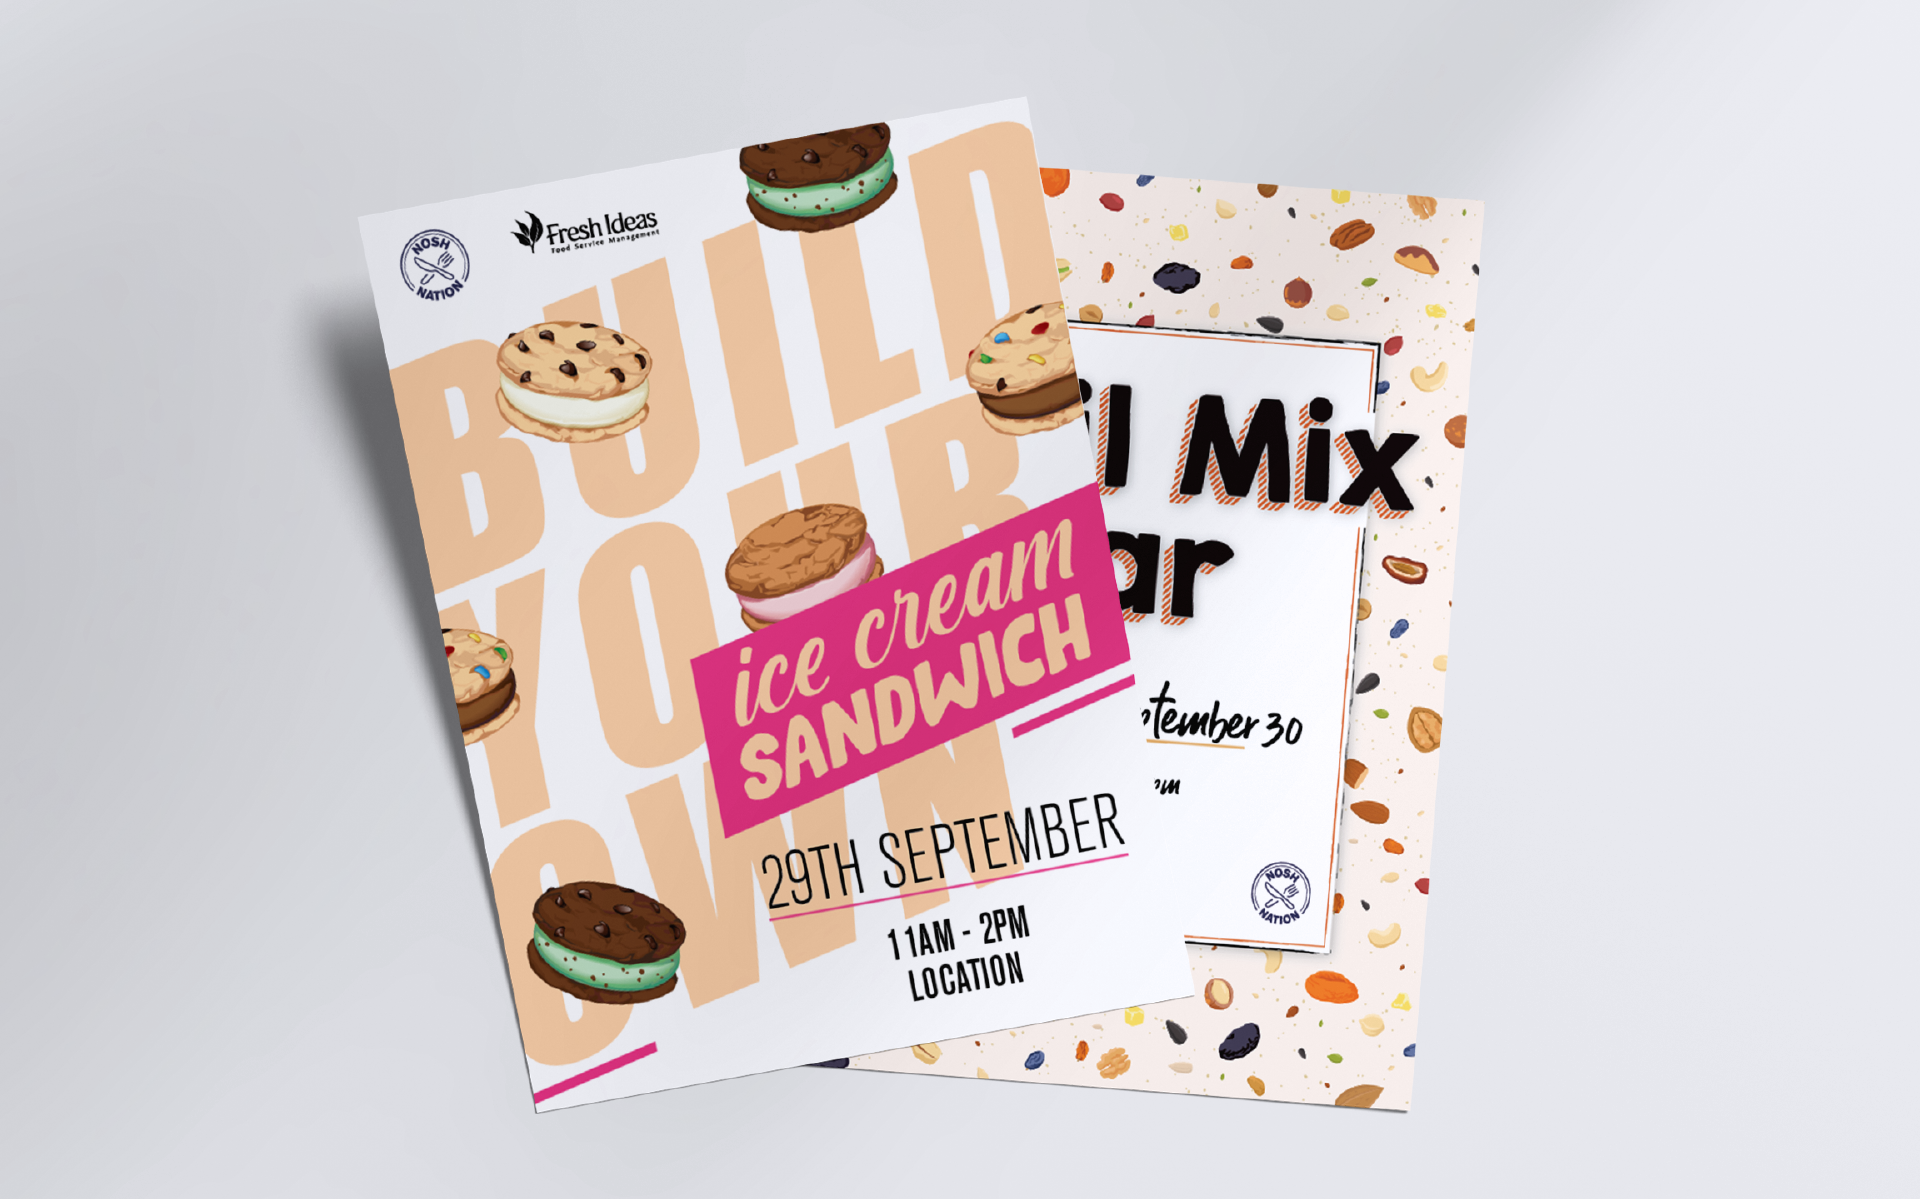 Two flyers on a blank background. The top one advertising a 